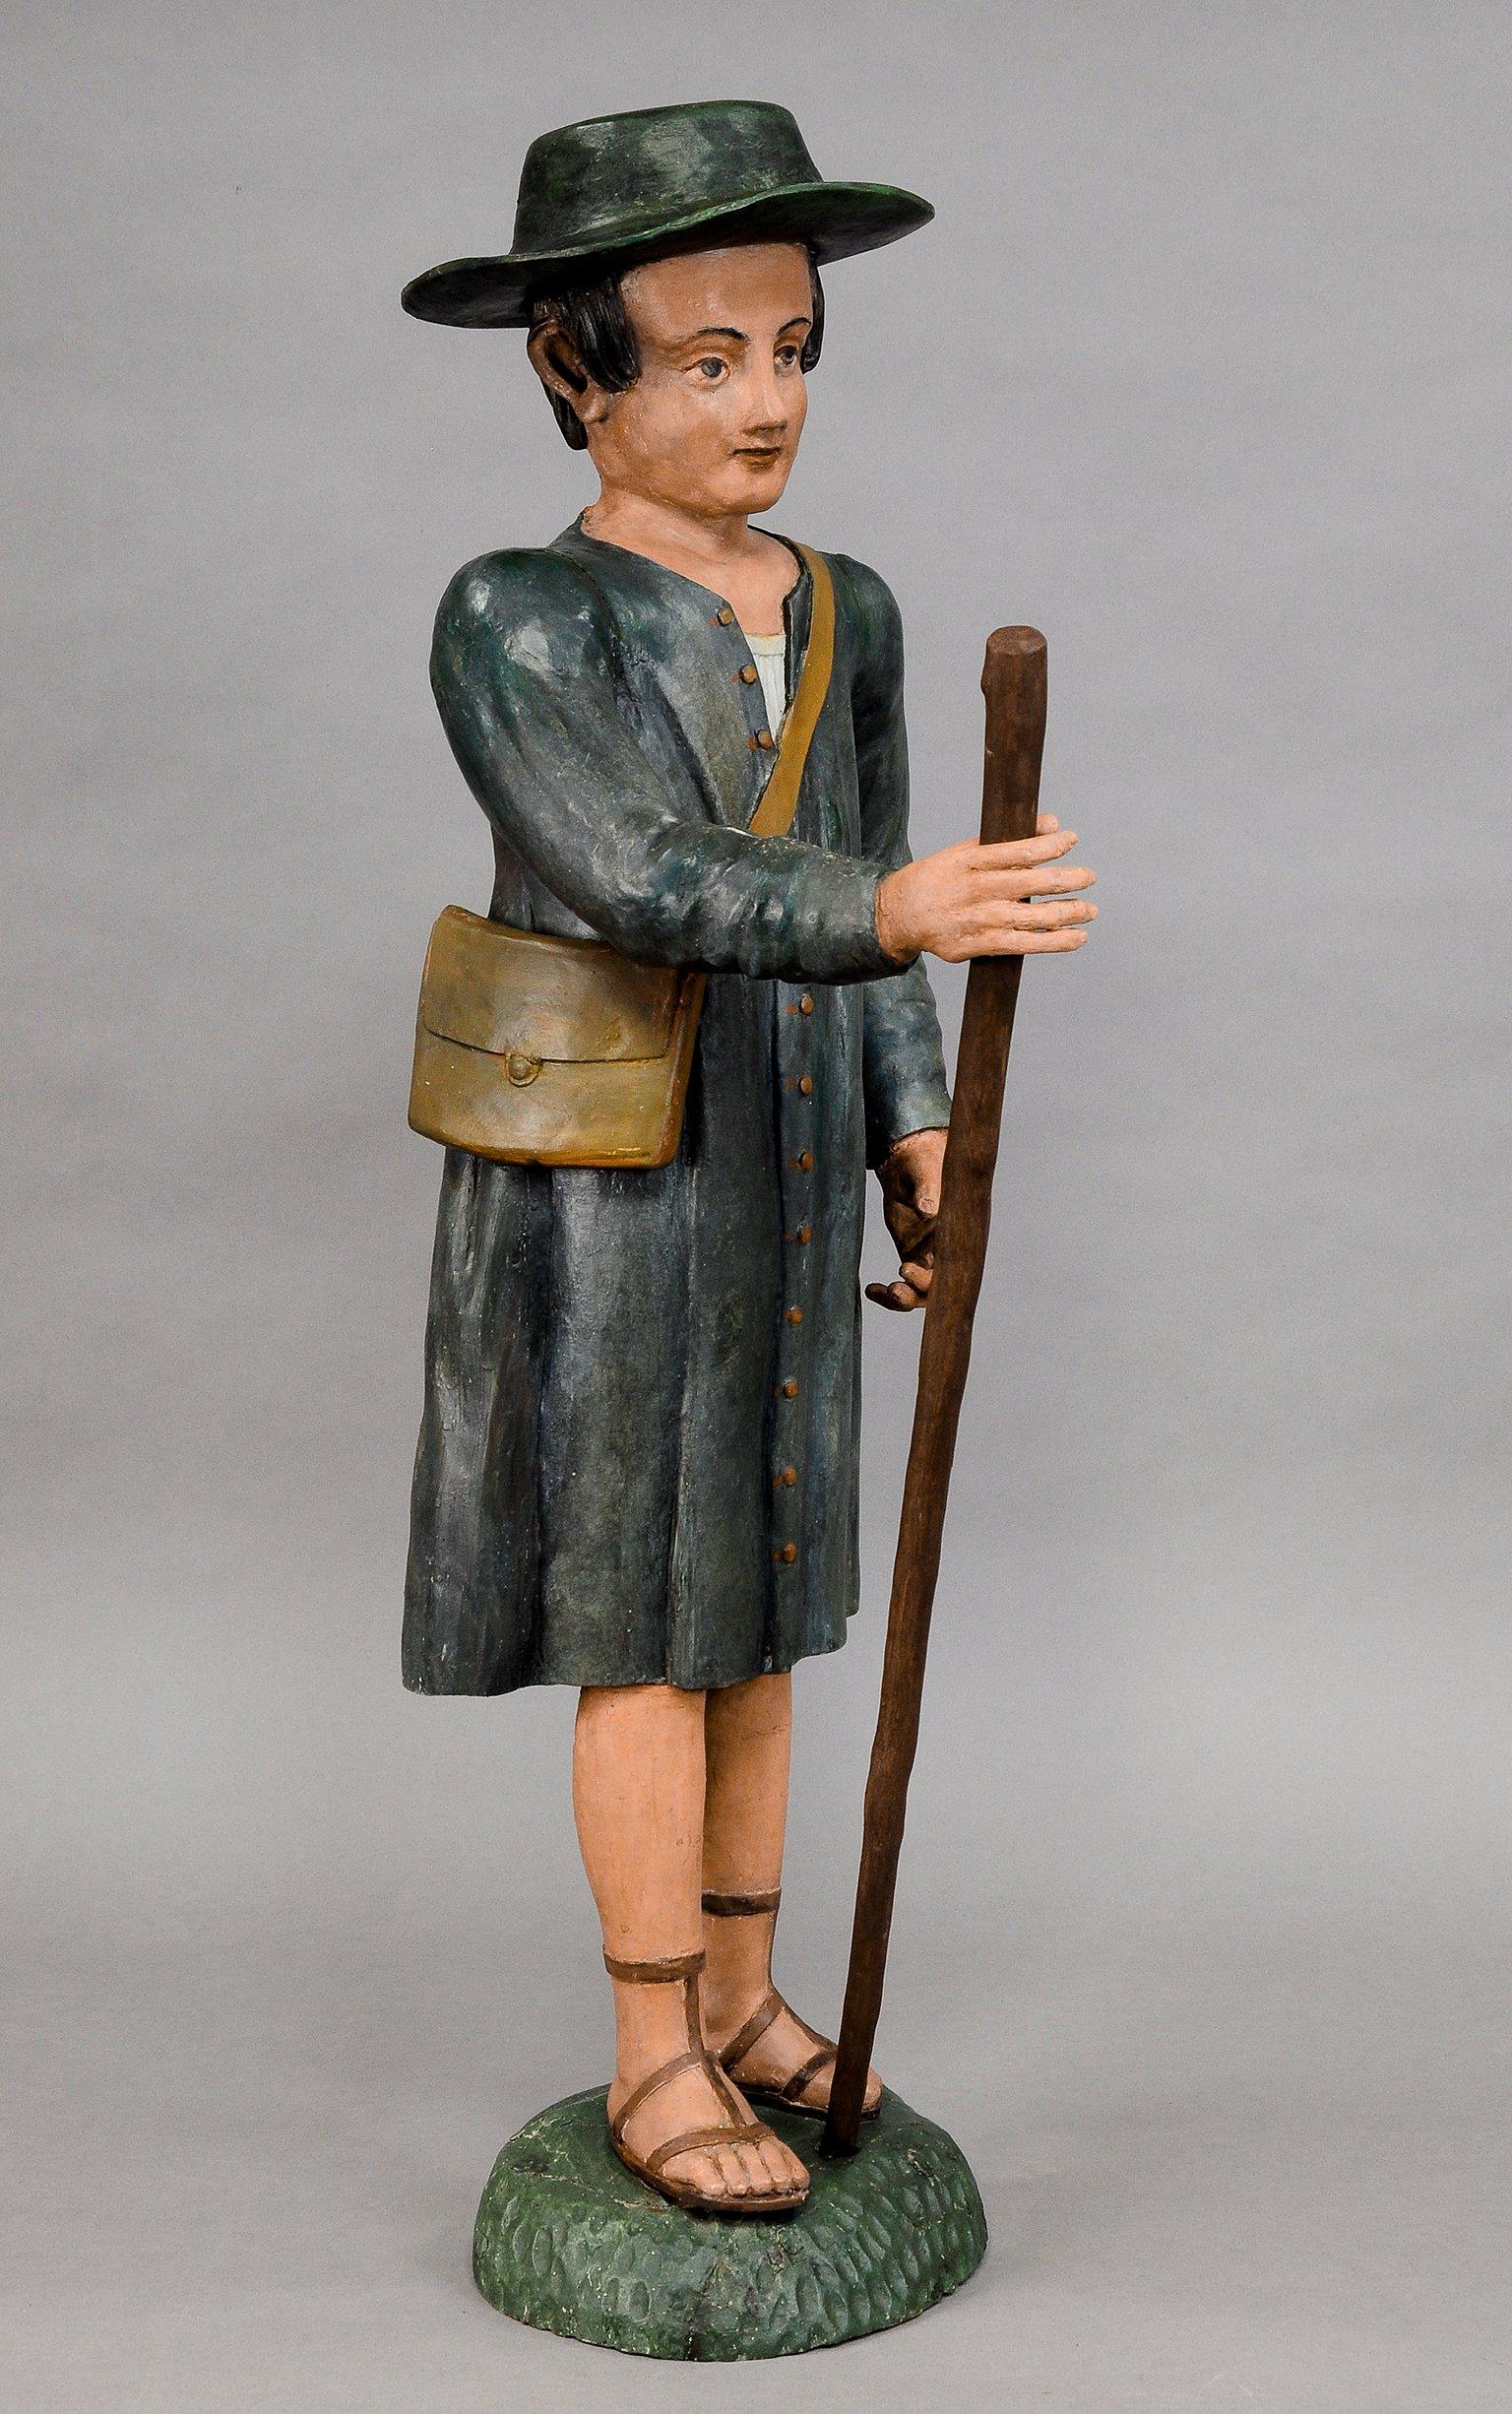 Antique Wooden Carved Crib Figurine of a Shepherd

A large antique wooden carved statue of a shepherd, probably from a Christmas crib. Handcarved in Germany in the second half of the 19th century. Hollow carved wood, handpainted. Paint partly